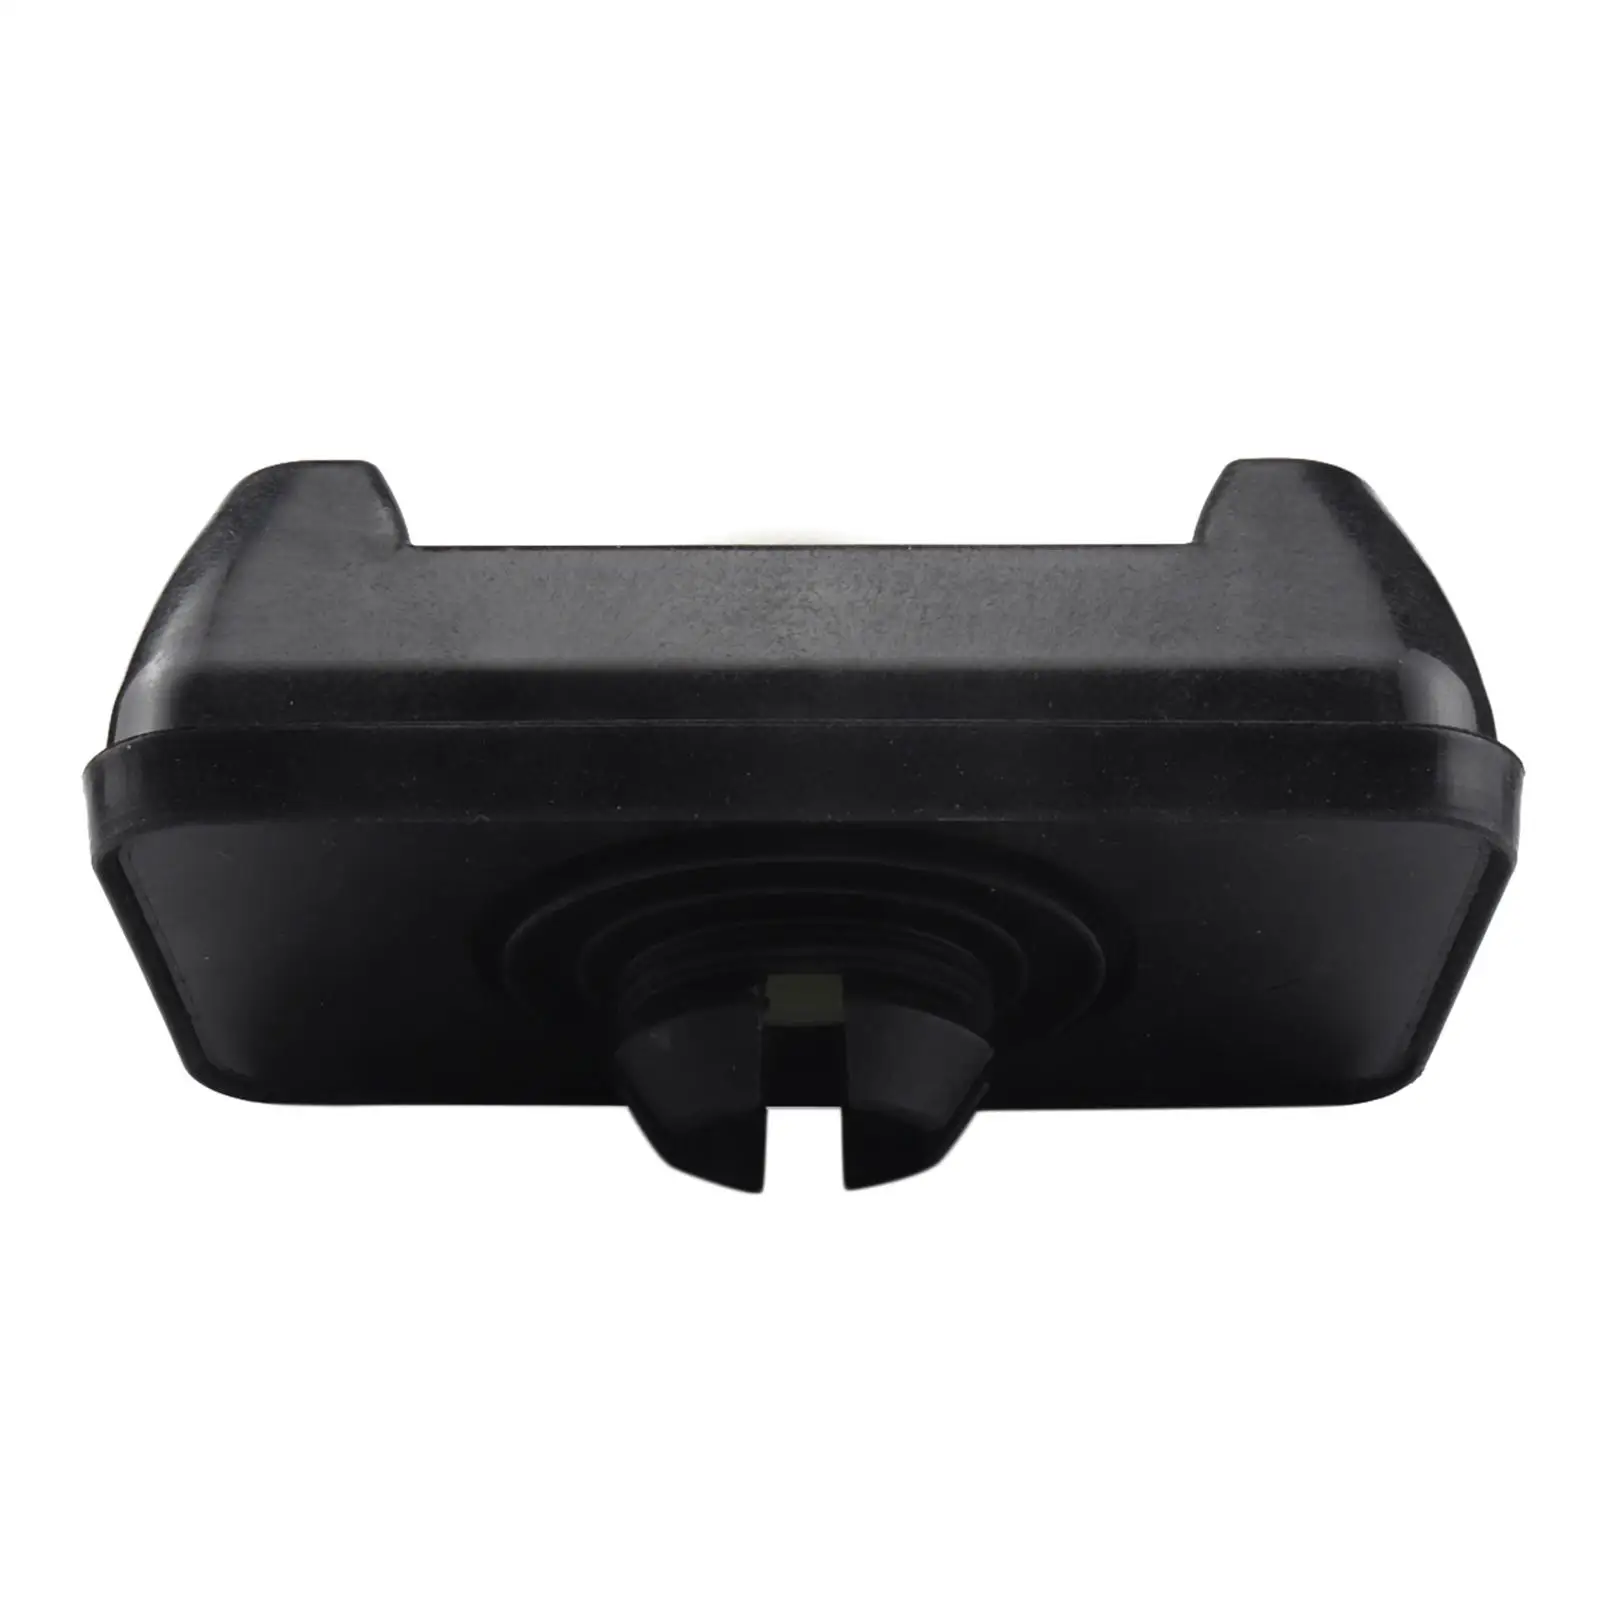 Car Jack Support Pad/ 2039970186 Accessory Jack Lift Point/ for W203 C219 C209 CLK CLS S C E